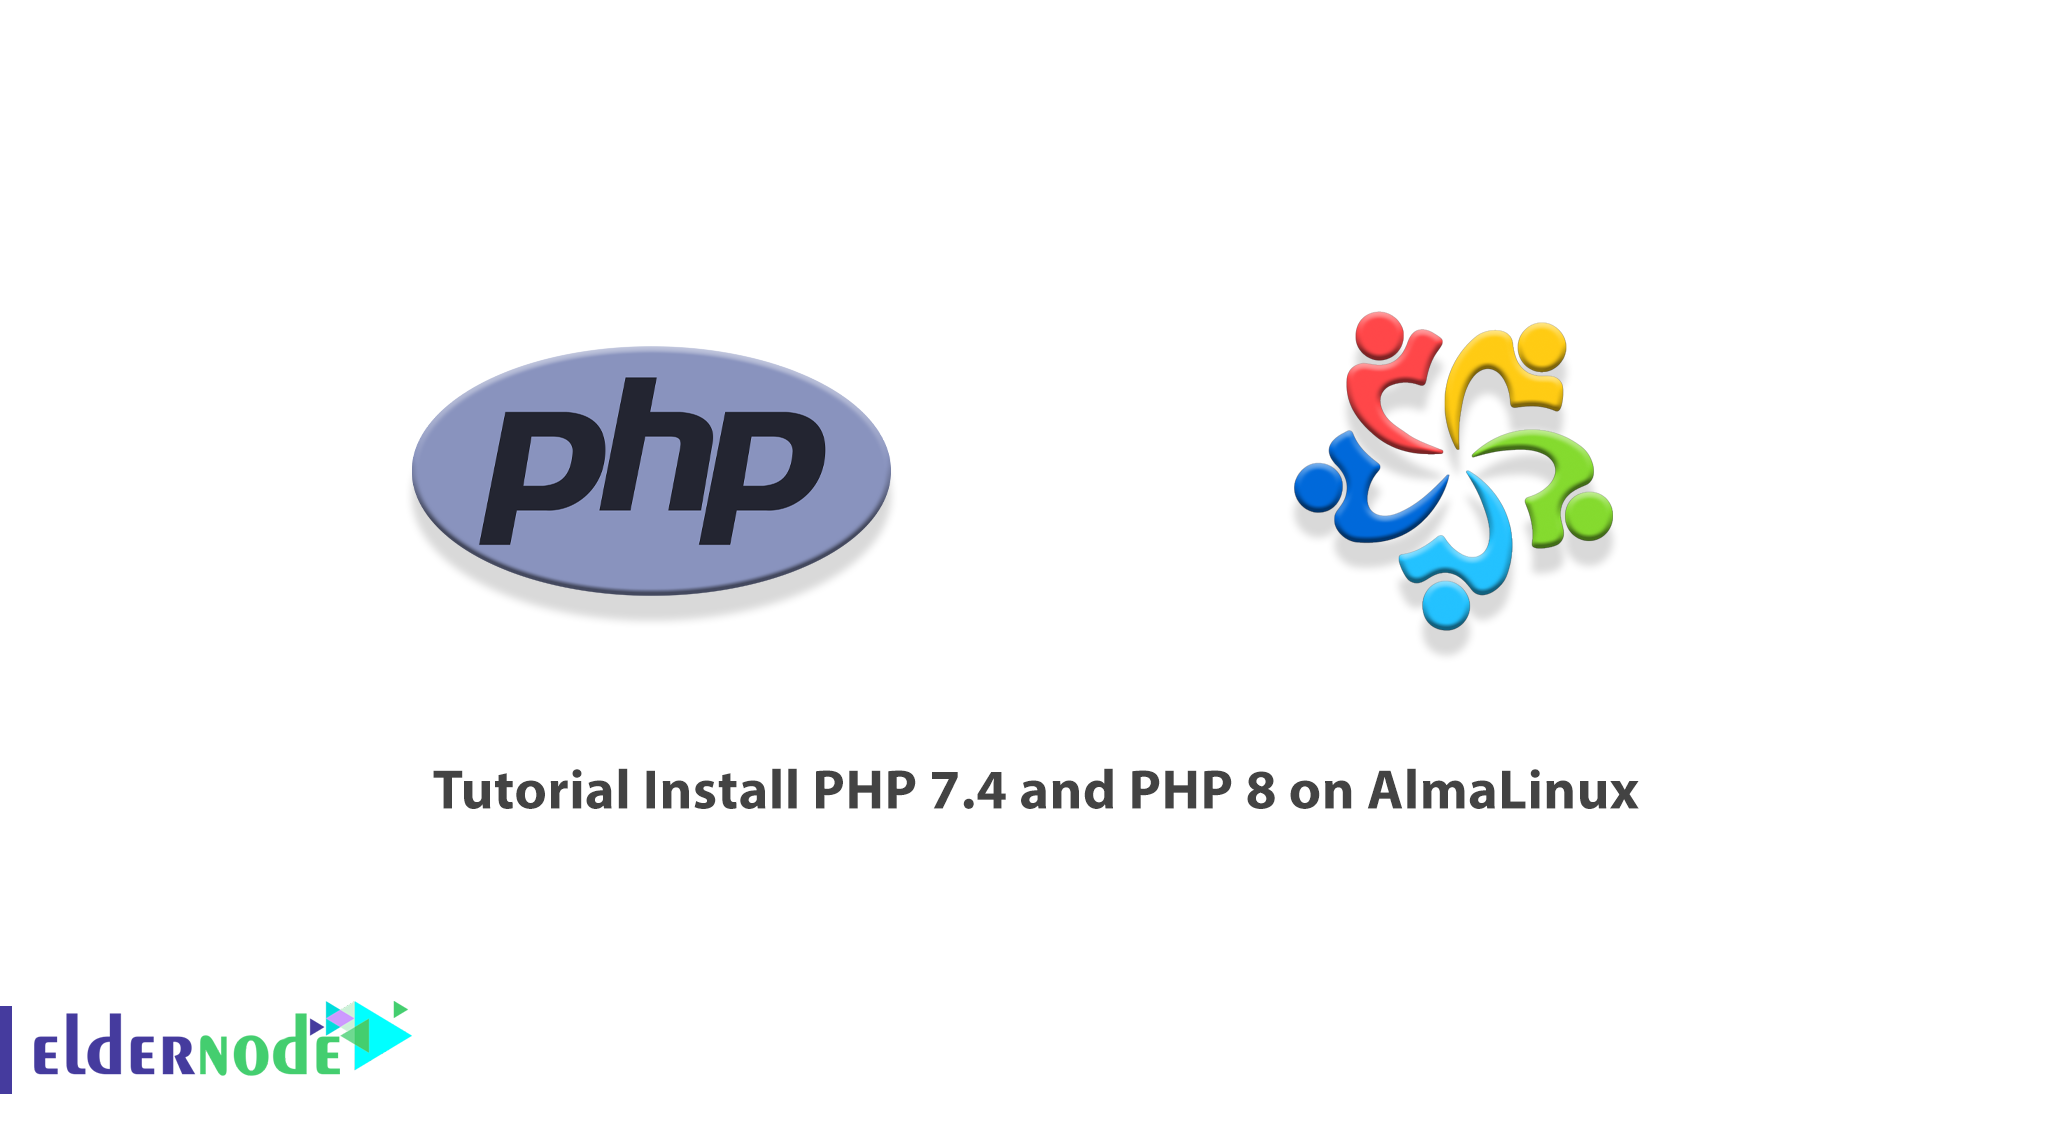 Tutorial Install PHP 7.4 and PHP 8 on AlmaLinux Eldernode Blog